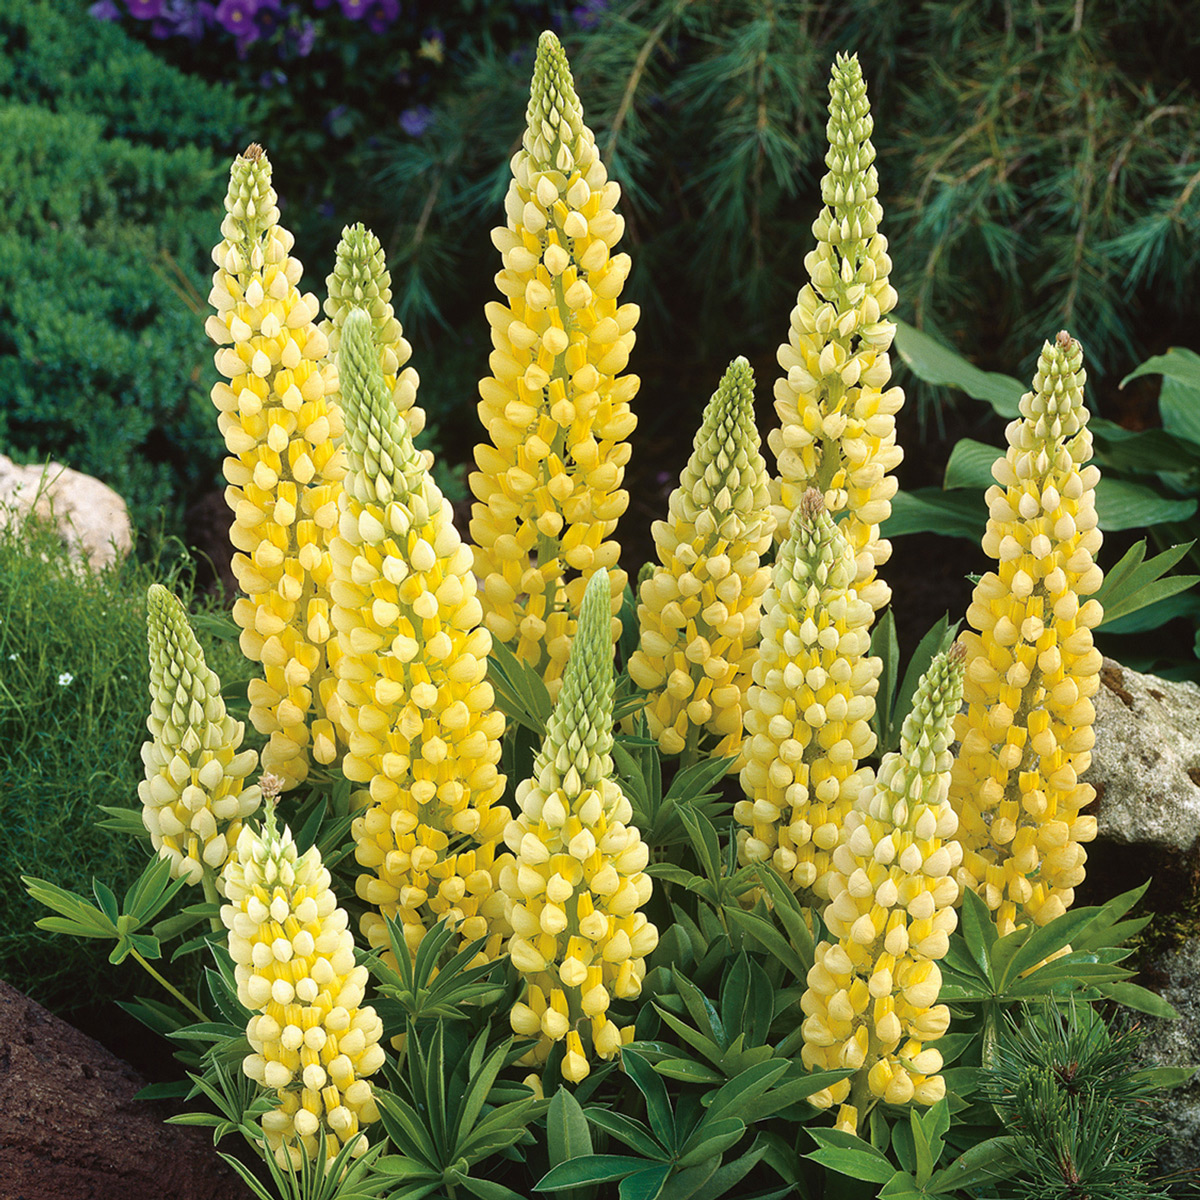 How to grow various colors of lupines from seeds